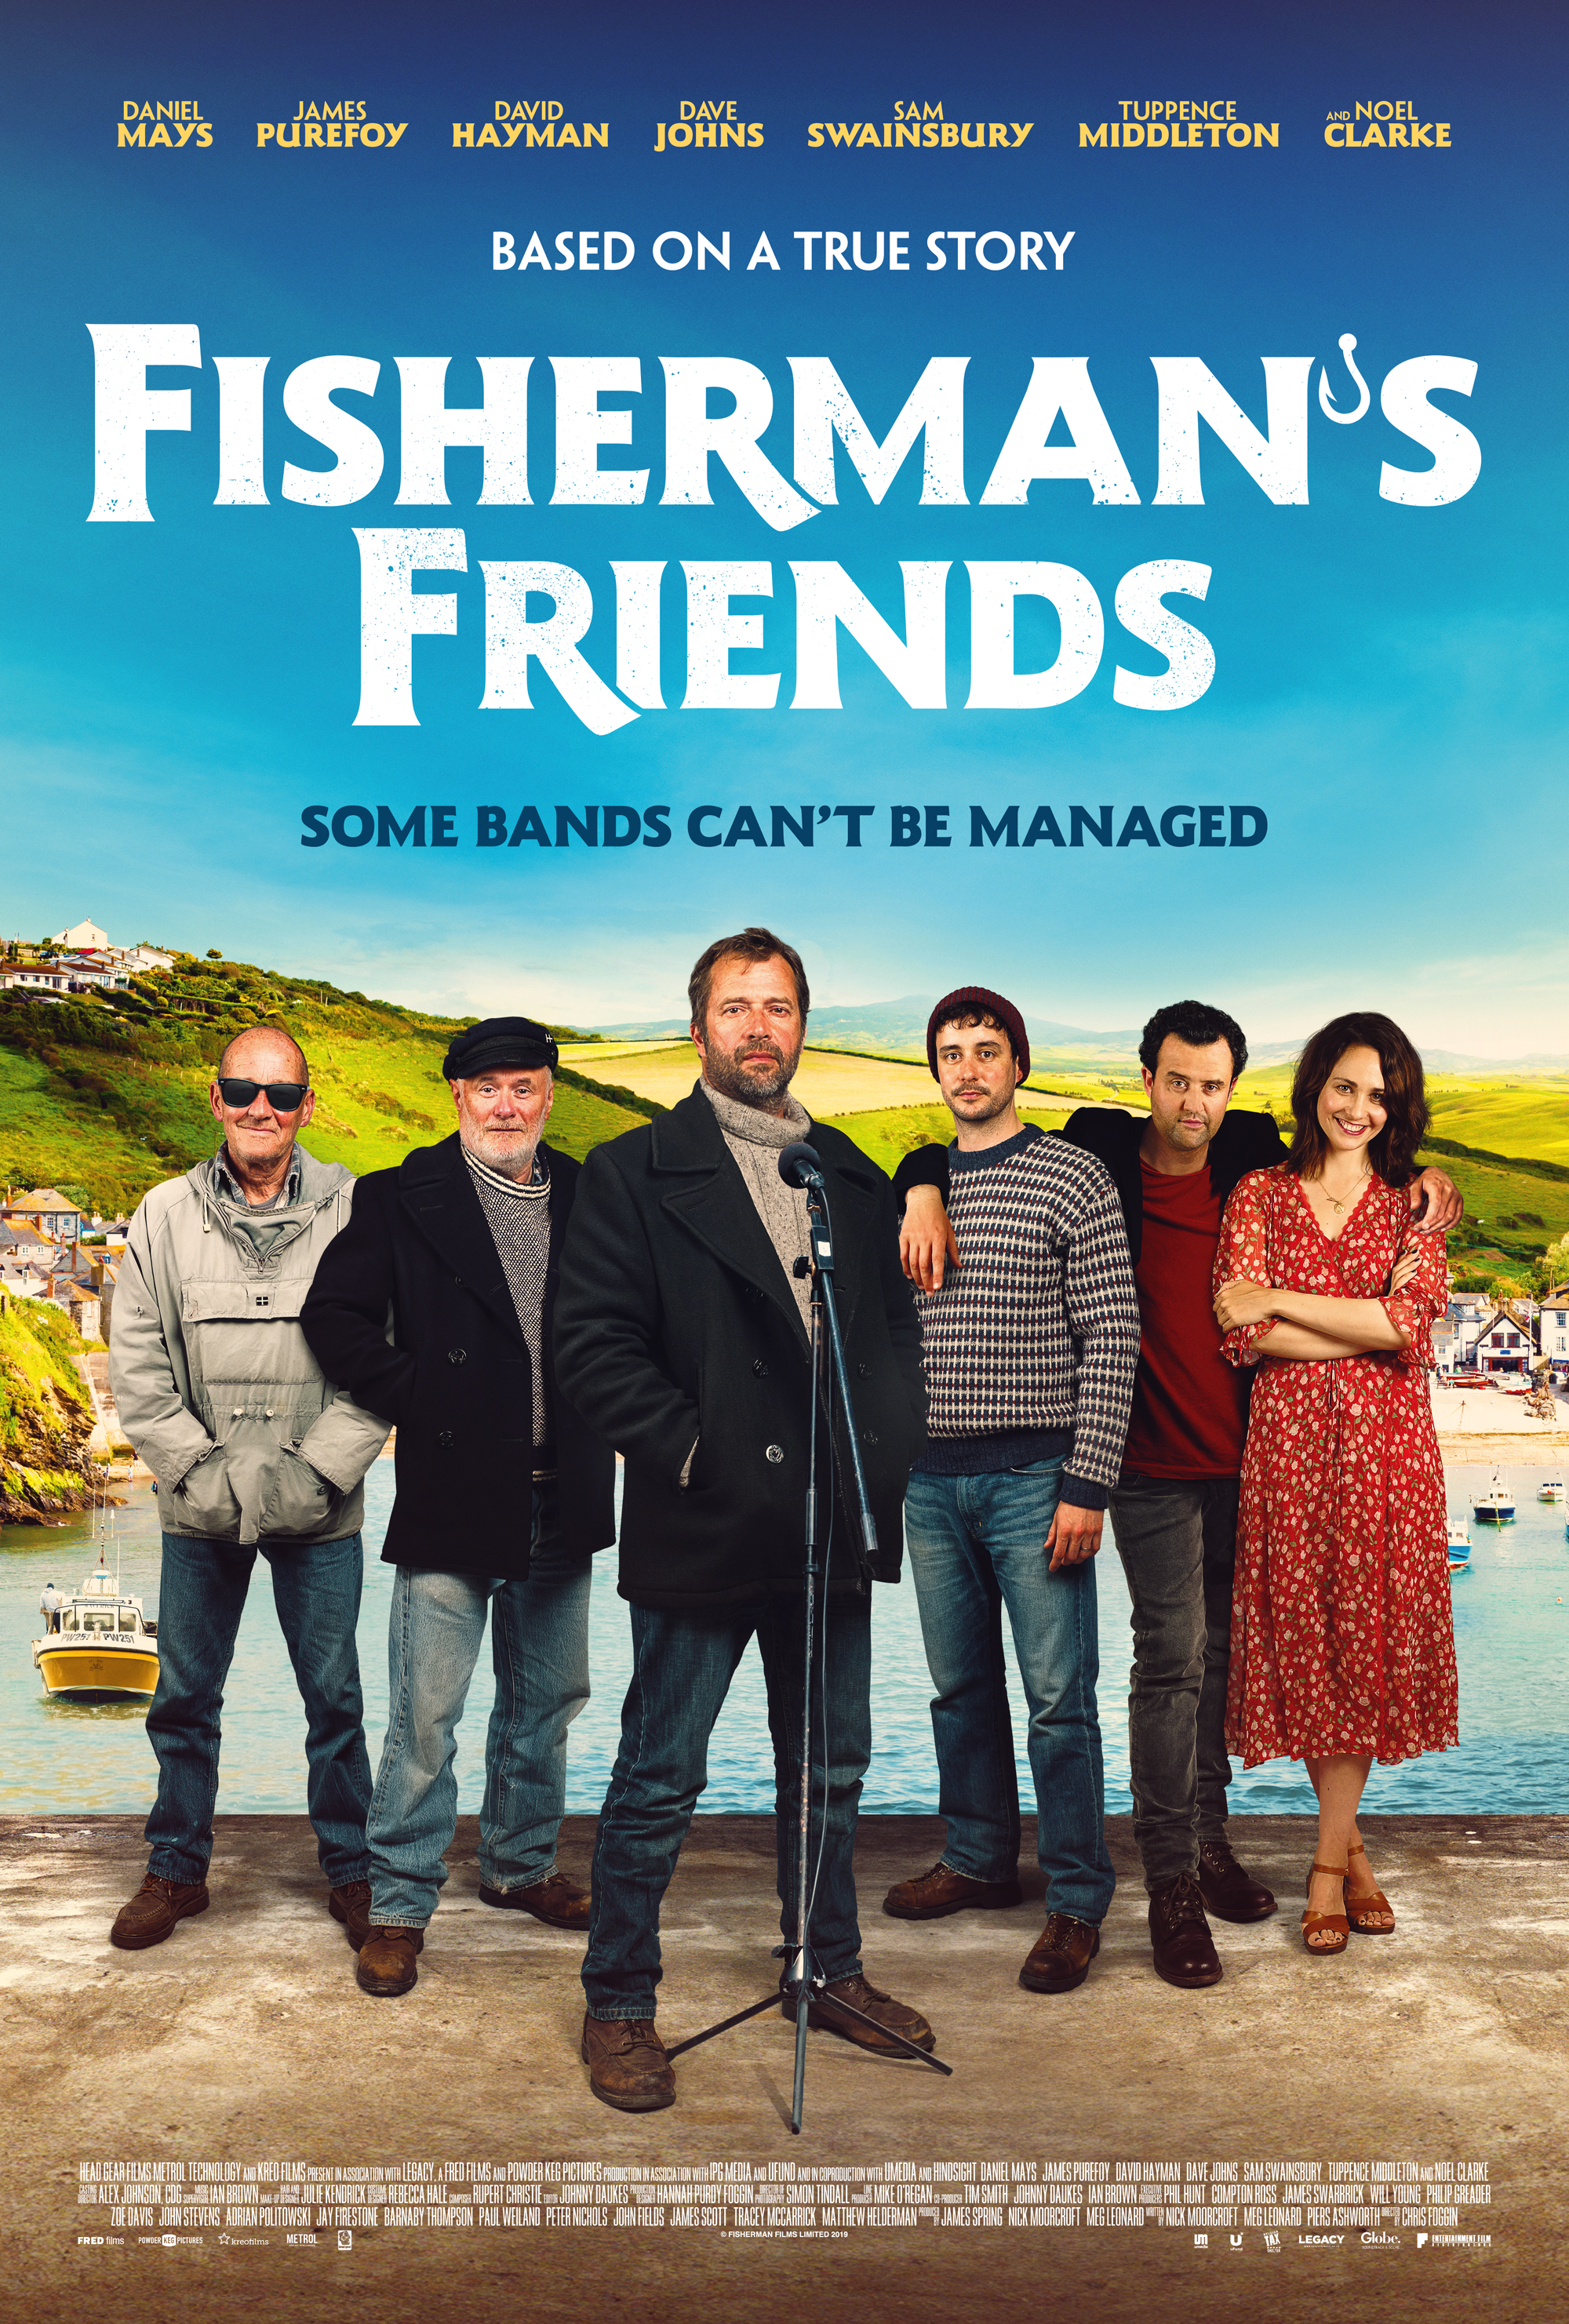 Cover Art for "Fisherman's Friends"